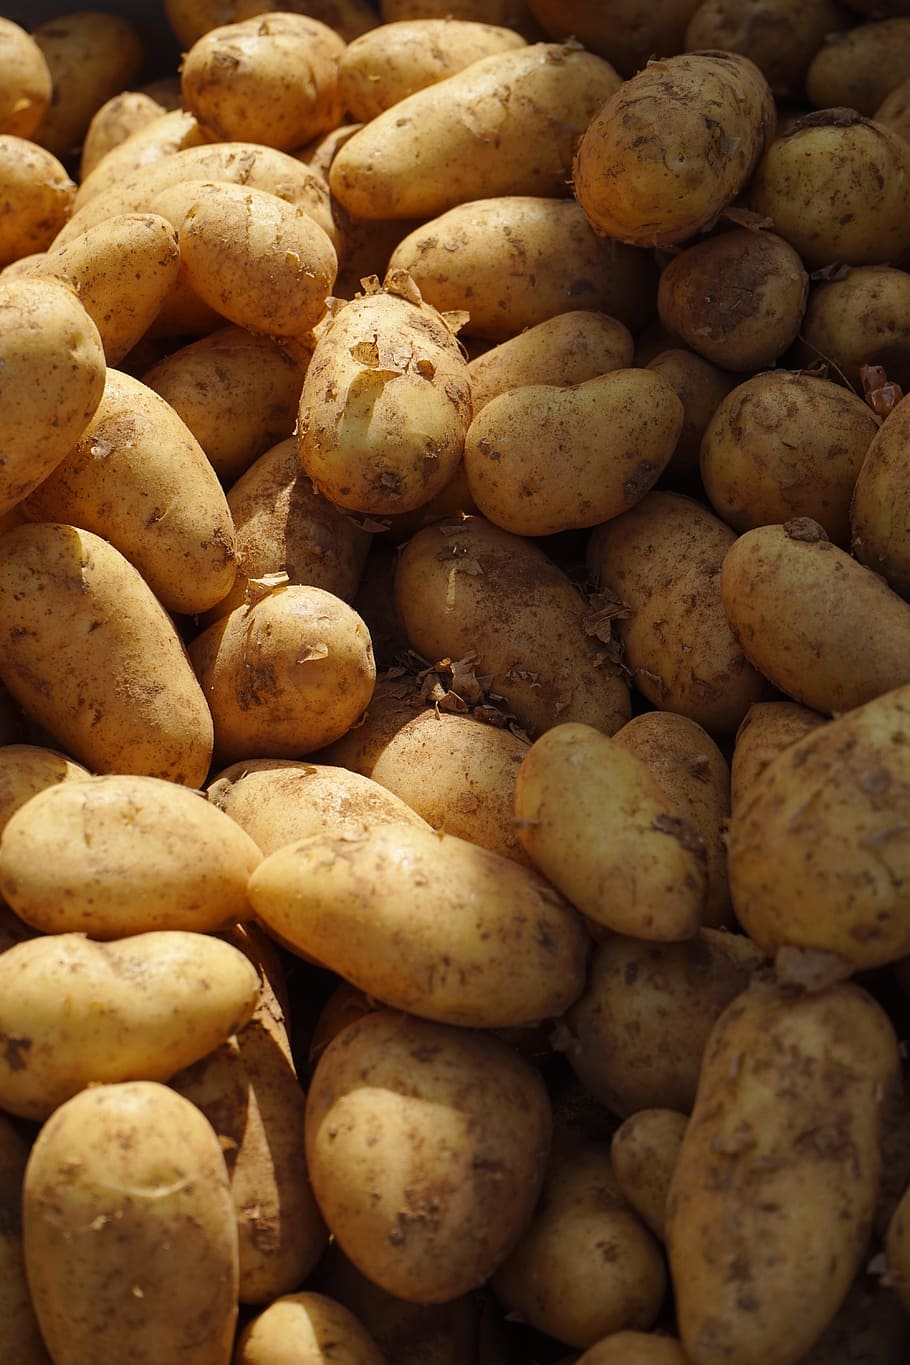 Potatoes, Market, Vegetables, Food, food and drink, healthy eating, large group of objects, close-up, freshness, abundance